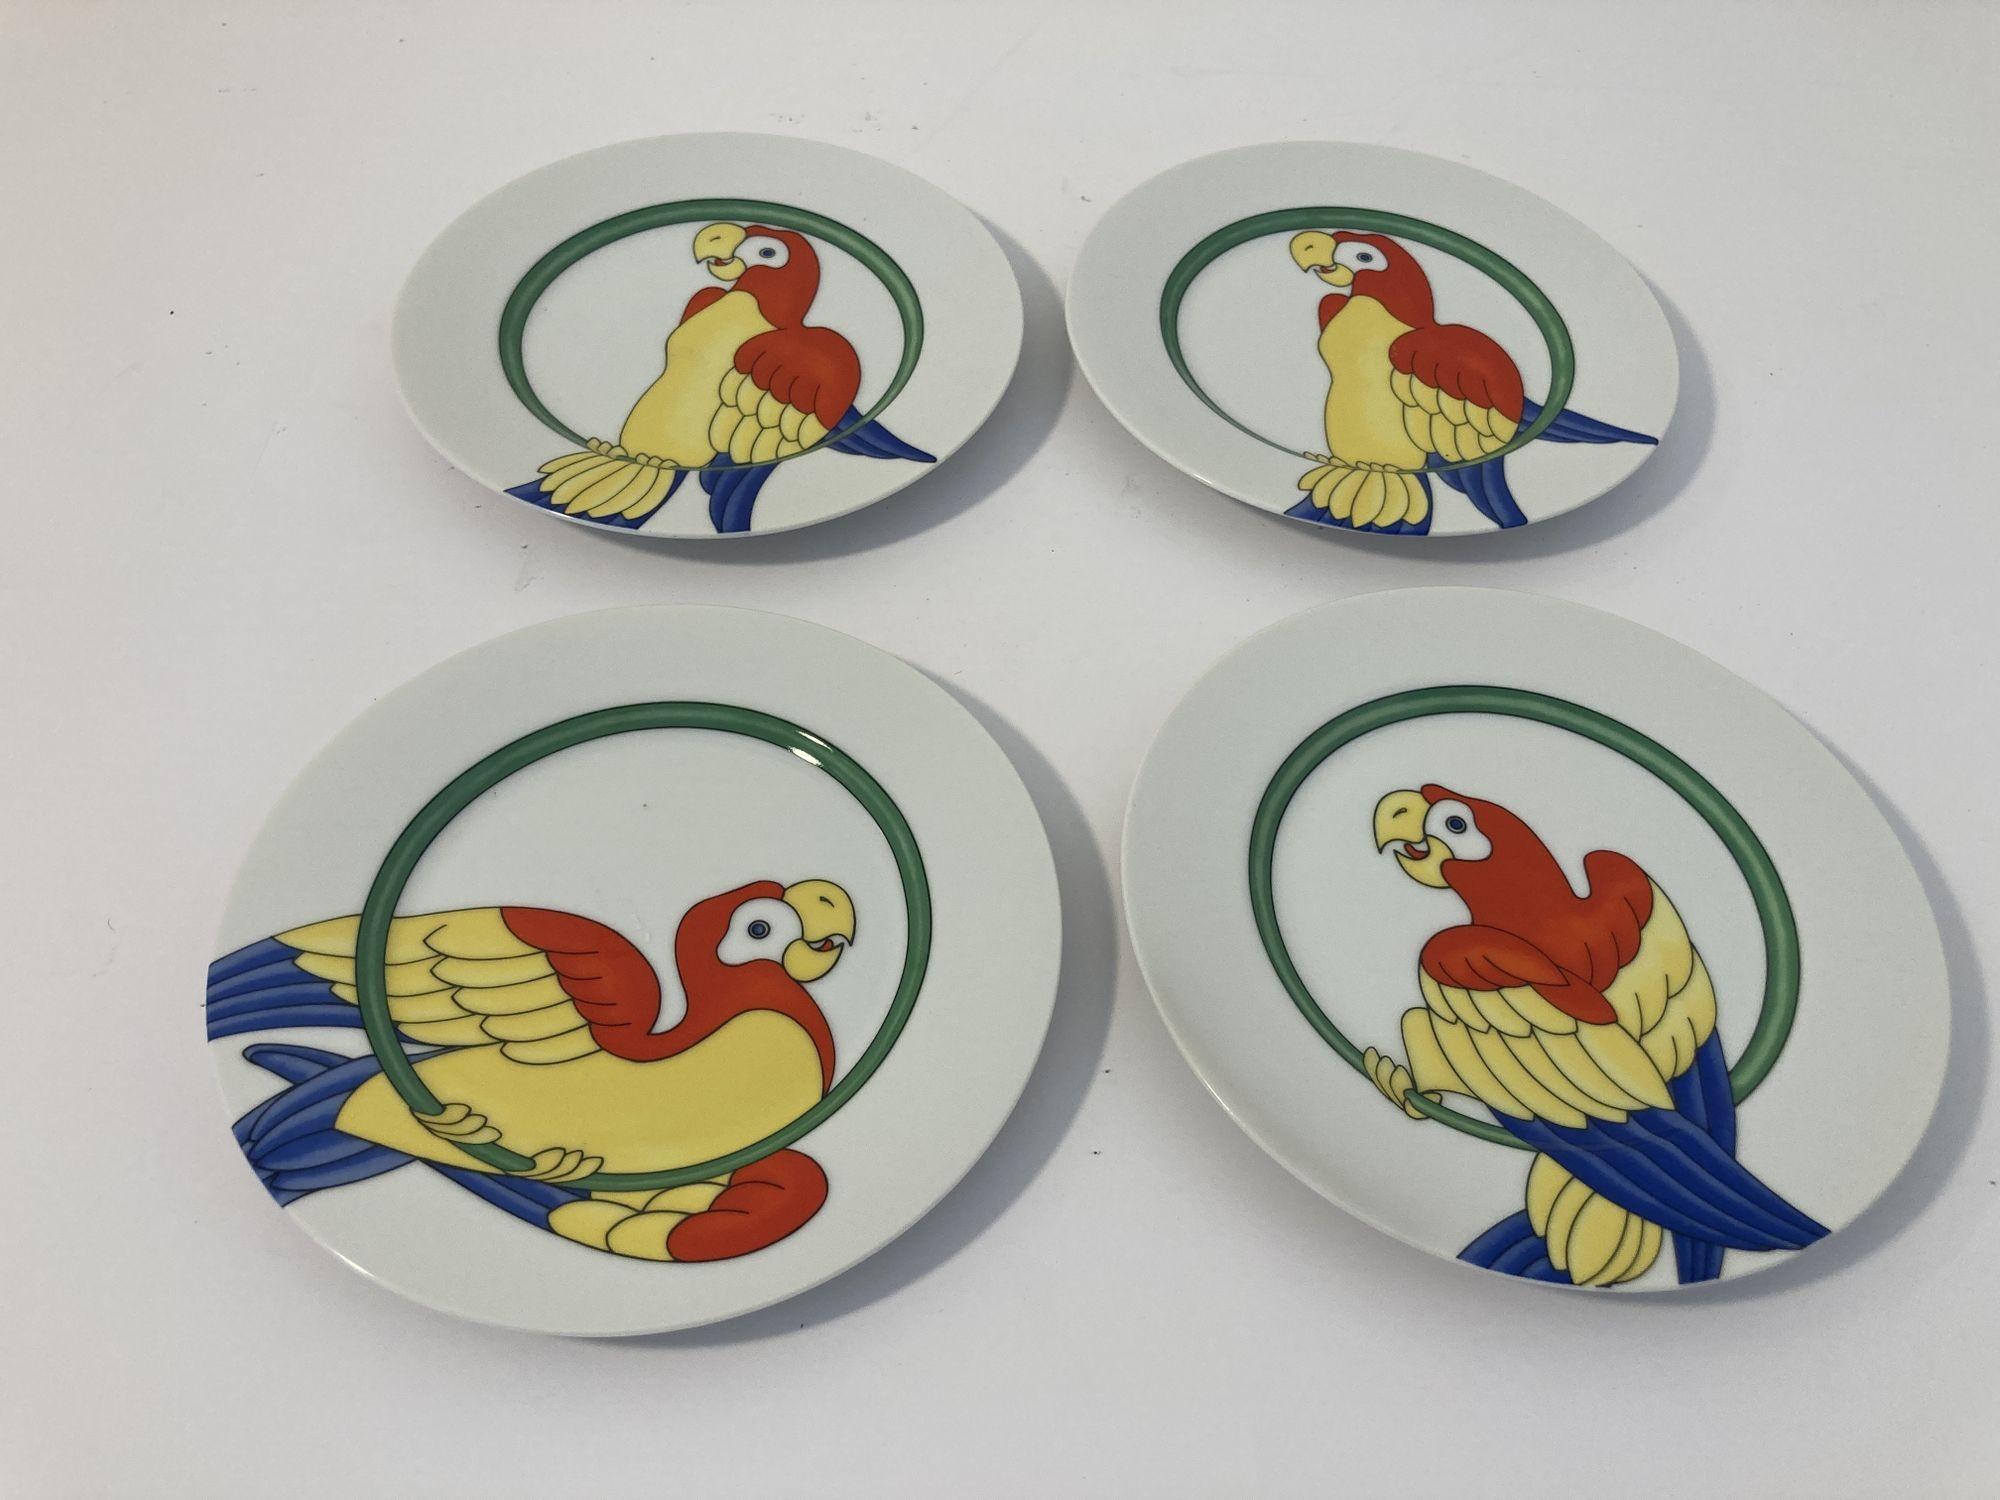 Vintage Parrots decorative plates by Fitz and Floyd set of 4.
Set of 4 Fitz and Floyd Parrot dishes, “Parrot in Ring”.
Appetizer, bread, Salad, dessert plates.
In excellent, like new condition
Dimensions: 7.5